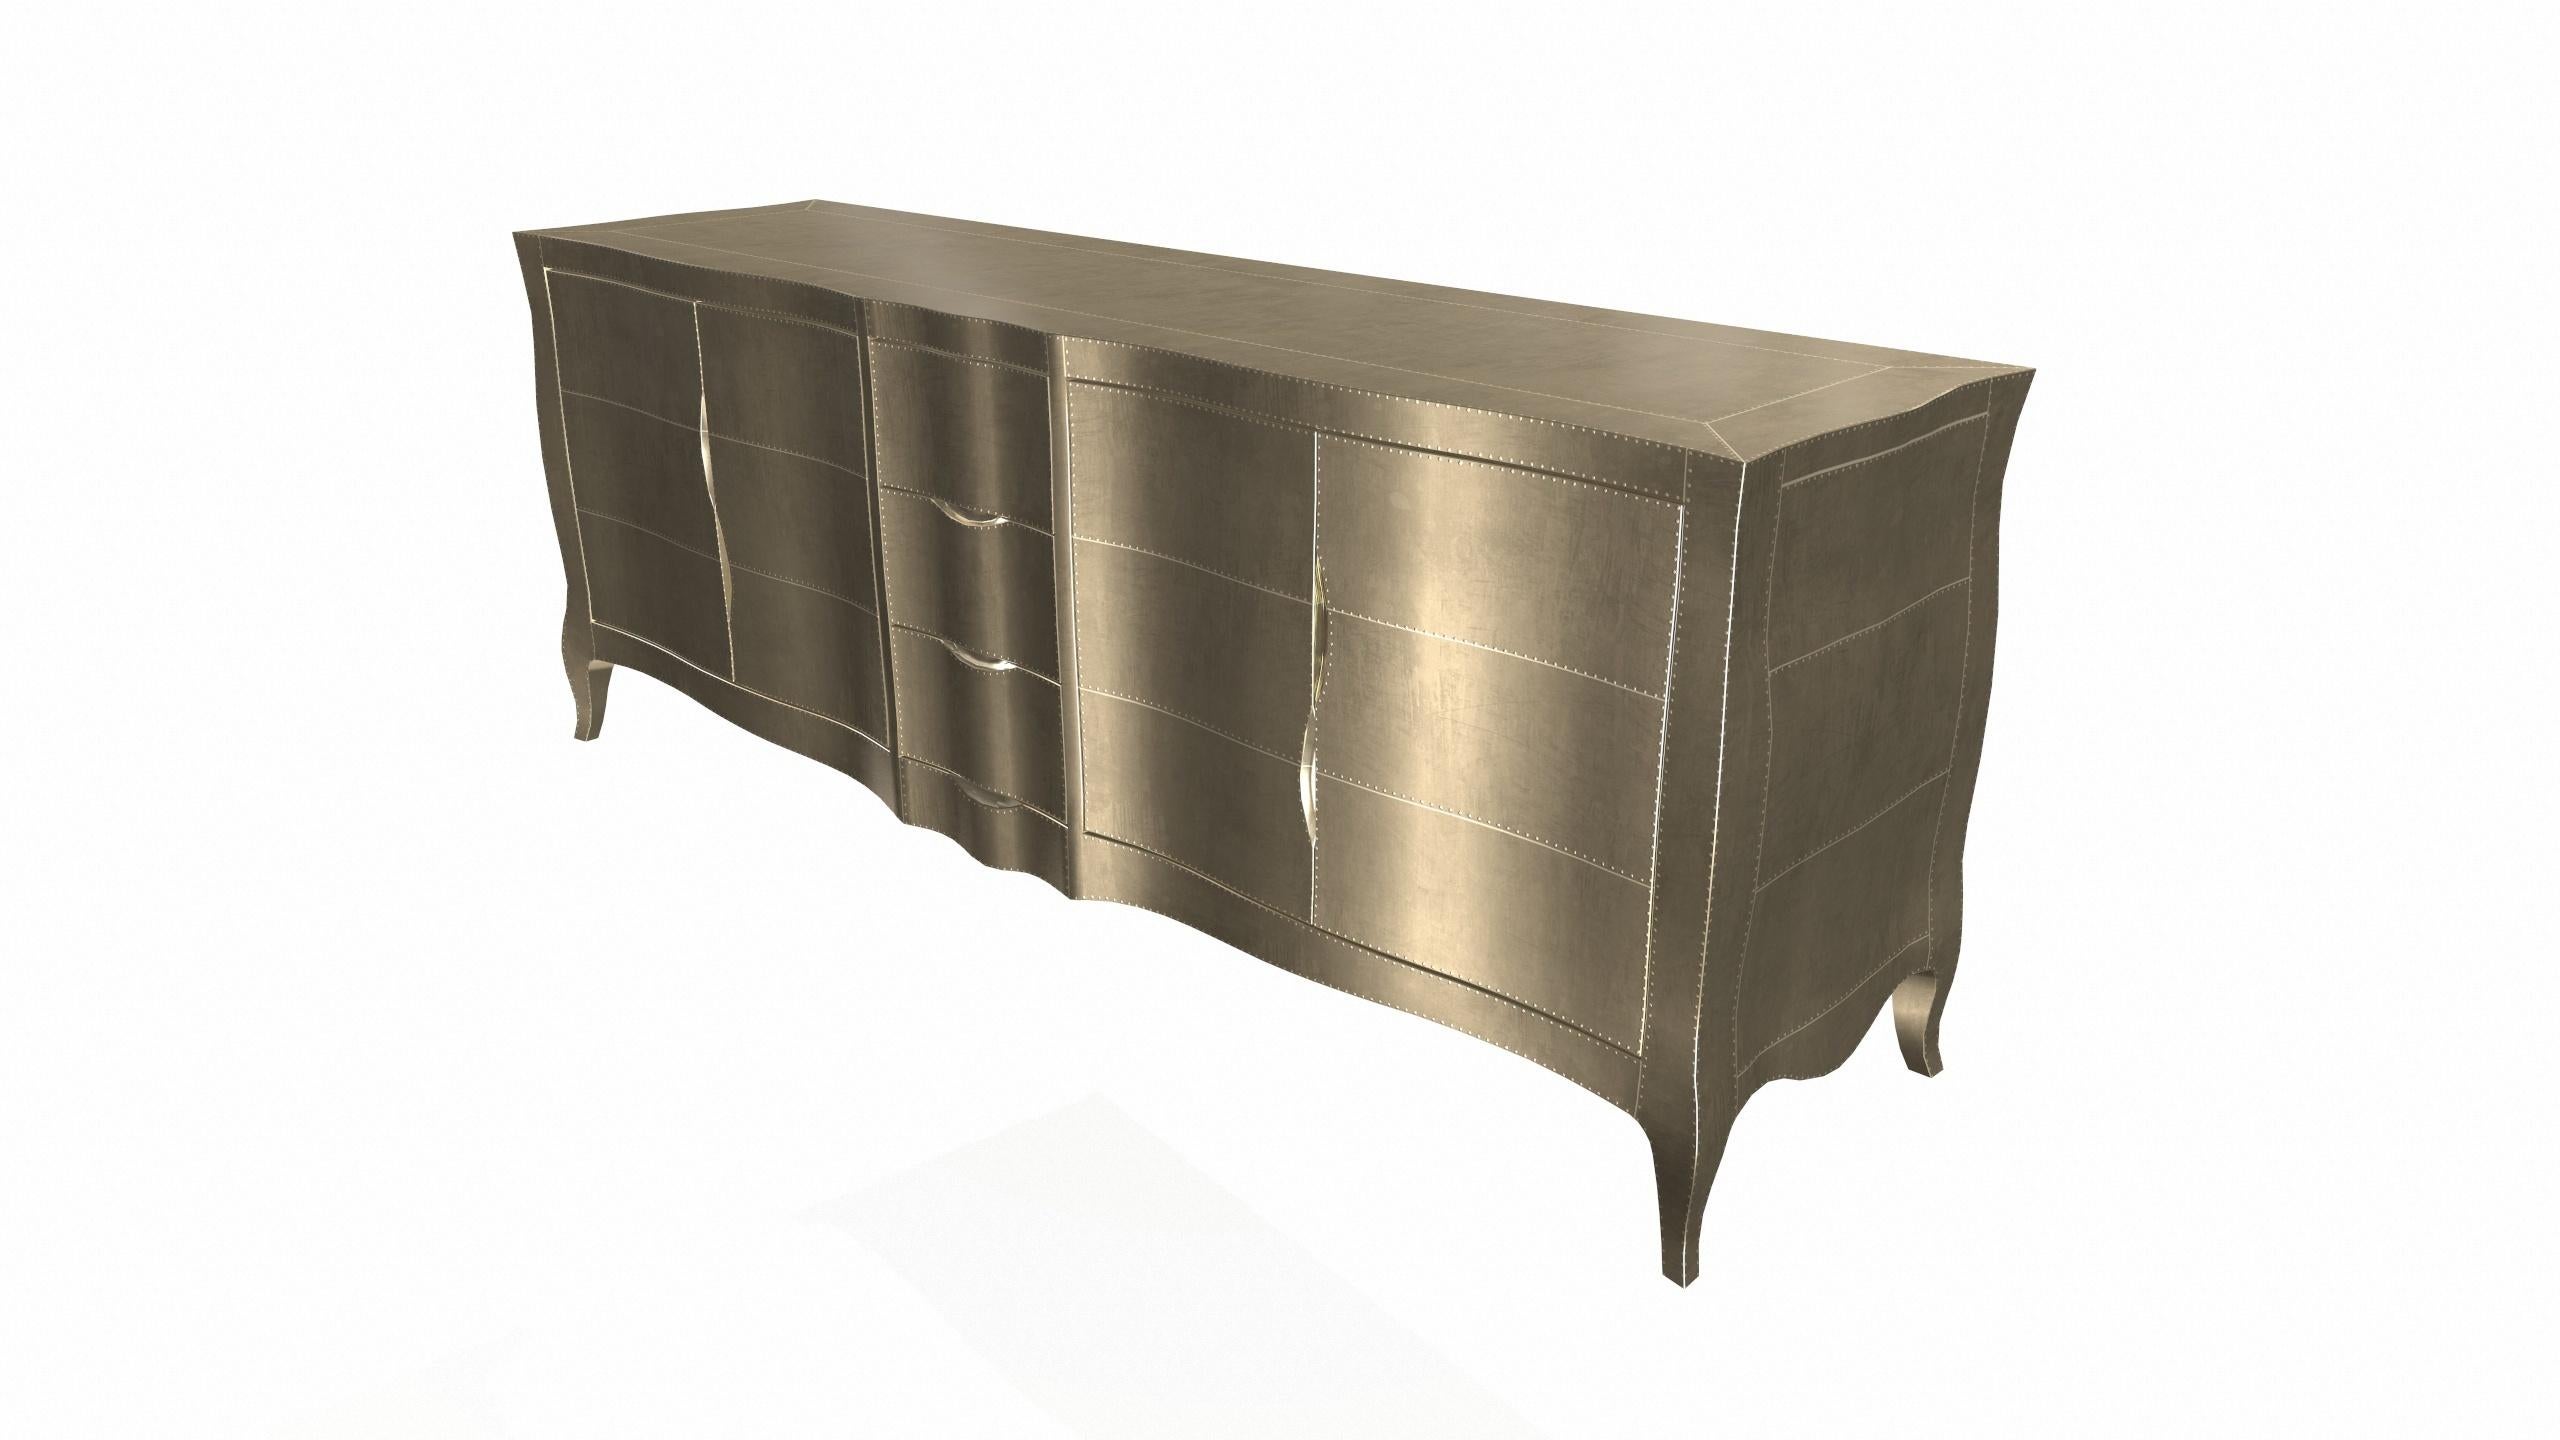 American Louise Credenza Art Deco Dressers in Smooth Brass by Paul Mathieu for S Odegard For Sale